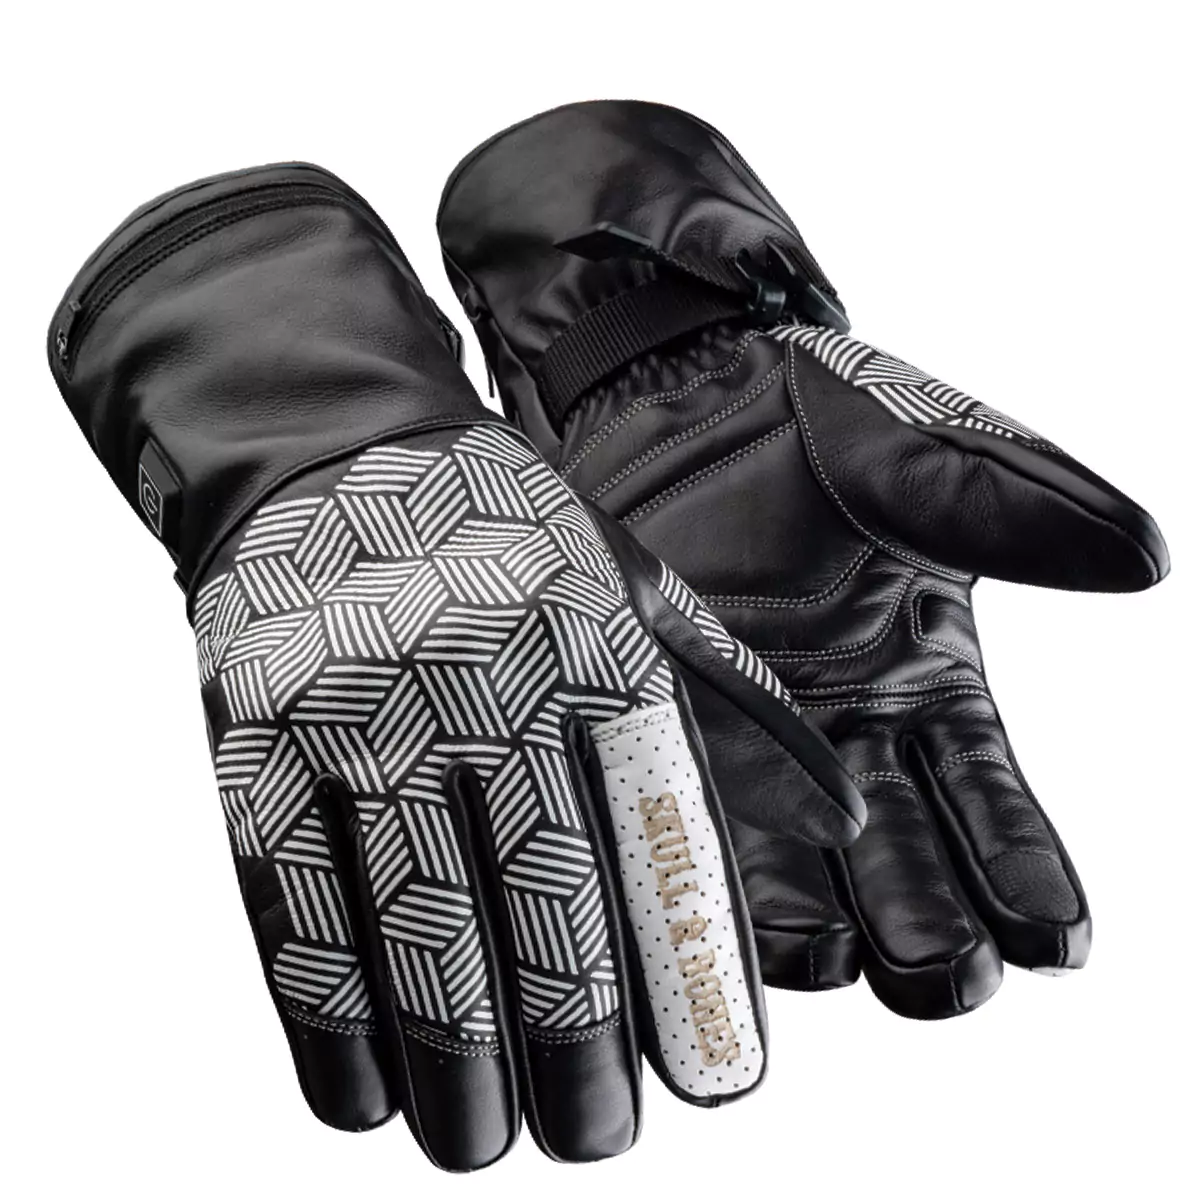 Pair of versatile leather winter riding gloves providing comfort and protection in varying weather conditions.